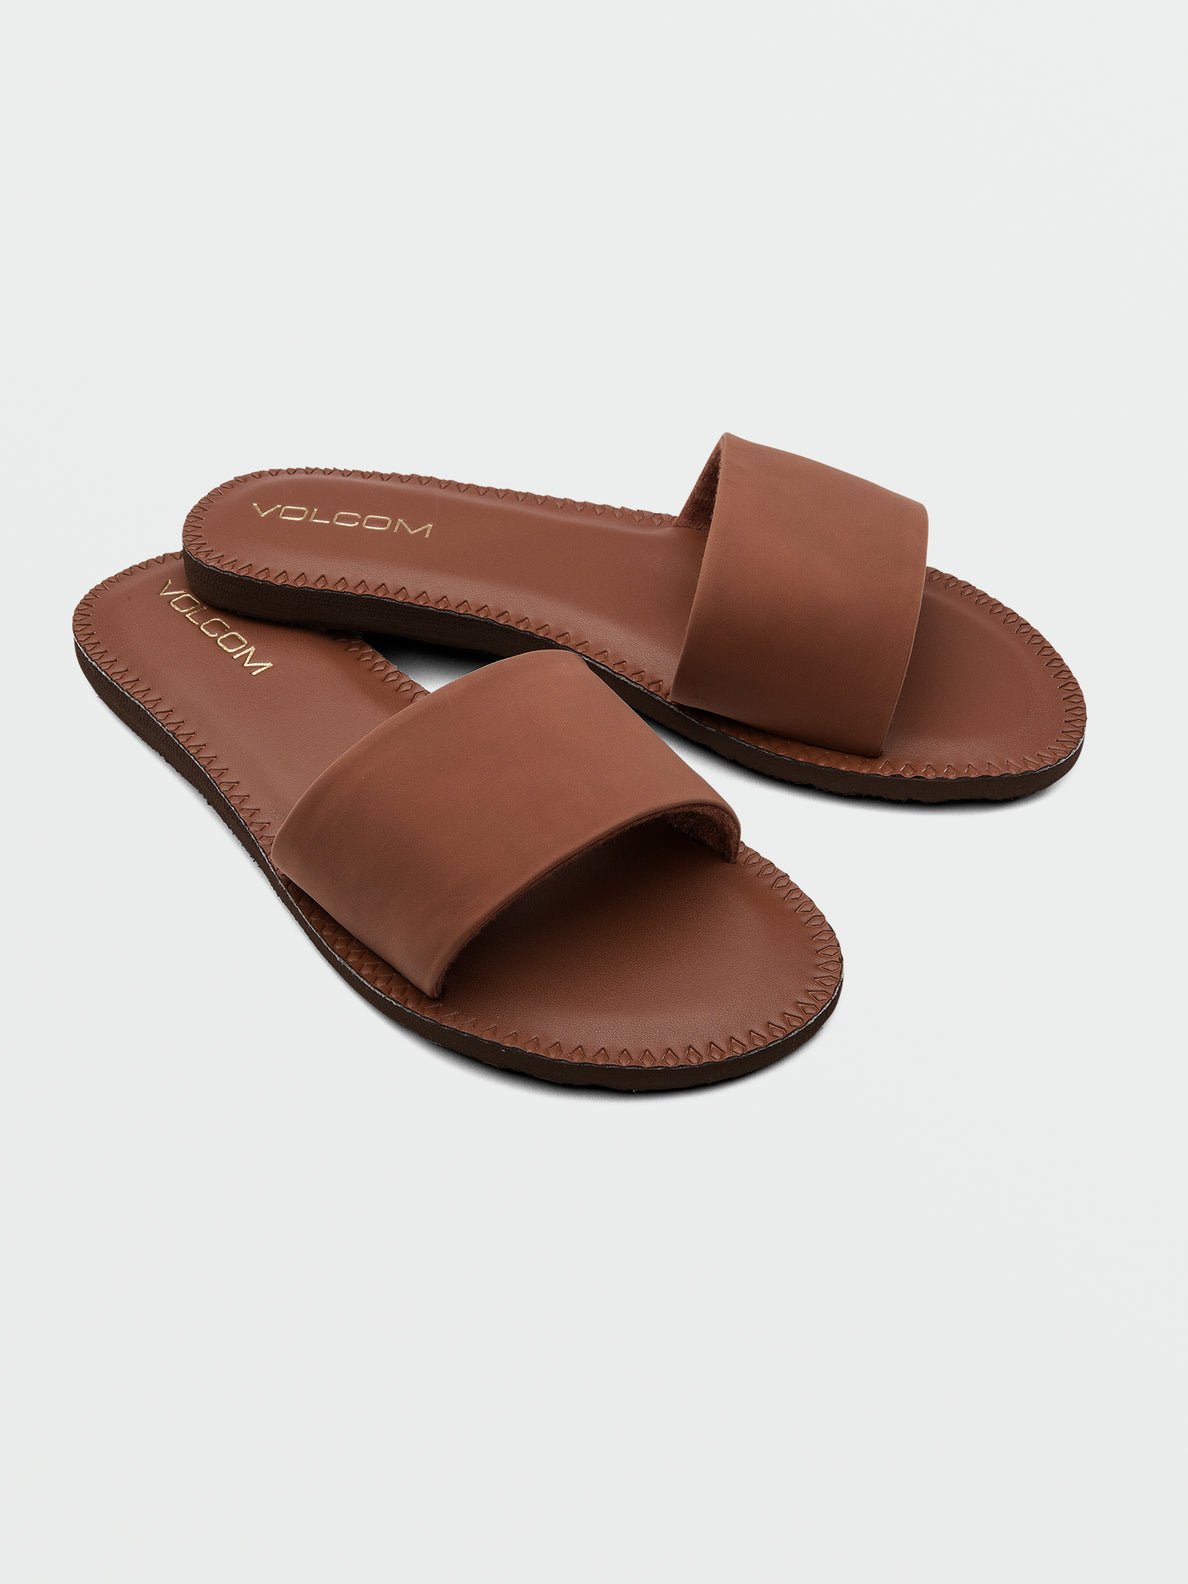 Simple Slide Sandals - Dark Clay (W0812350_DCL) [F]